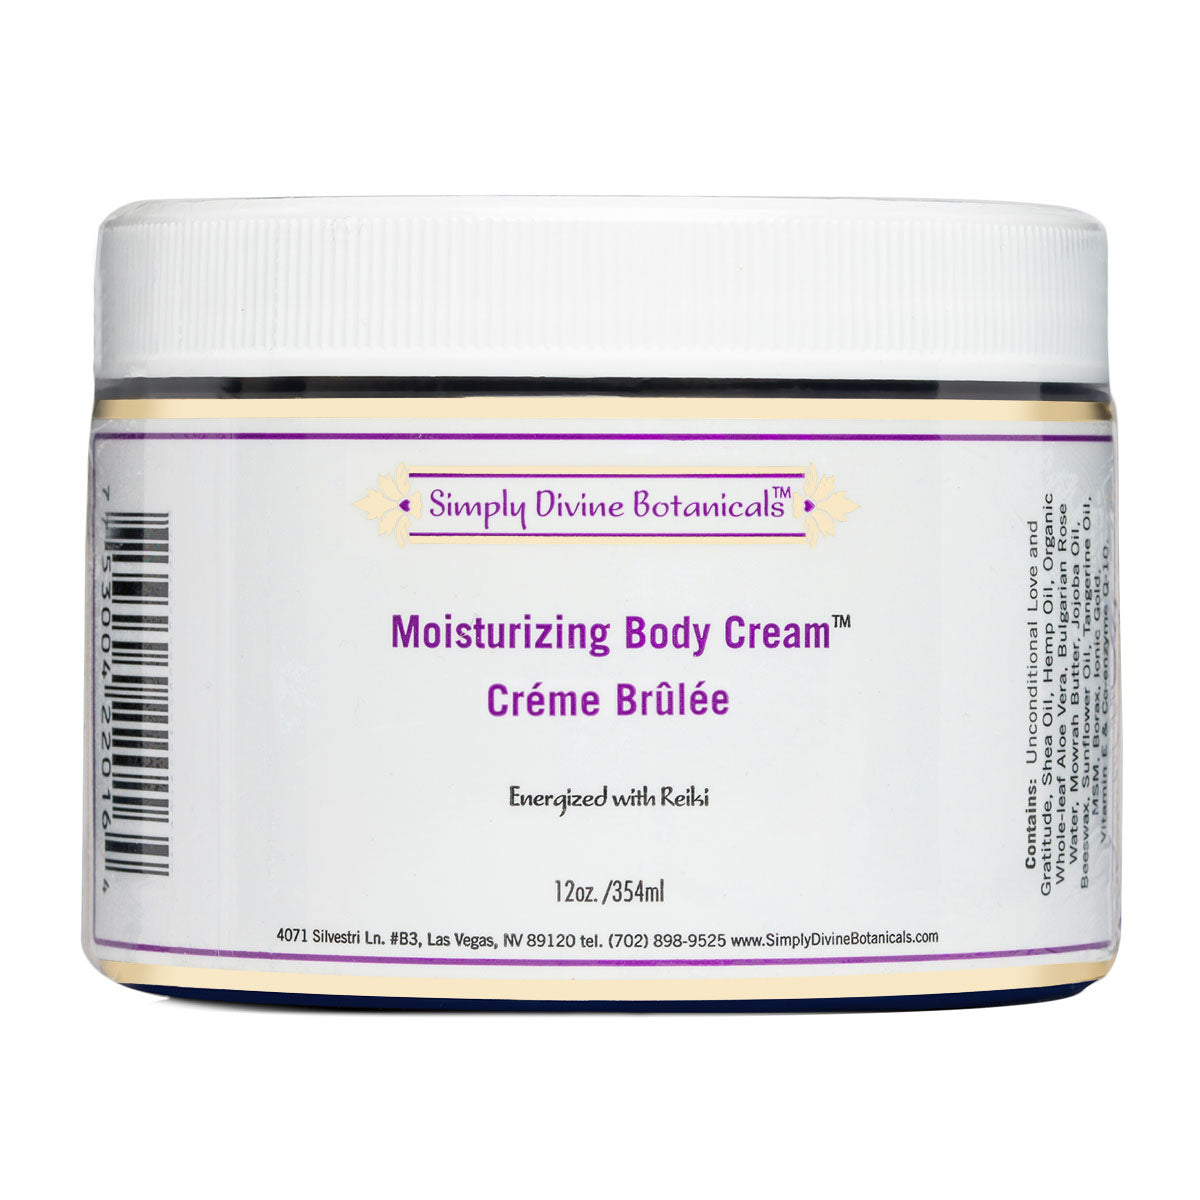 Body Cream Creme Brulee | Simply Divine Botanicals | Raw Living UK | Skin Care &amp; Beauty | Simply Divine Botanicals Natural Body Creme is a Rich &amp; Luxurious Cream Moisturiser for the Hands &amp; Body. Use it all over to enjoy Soft Fragrant Skin.